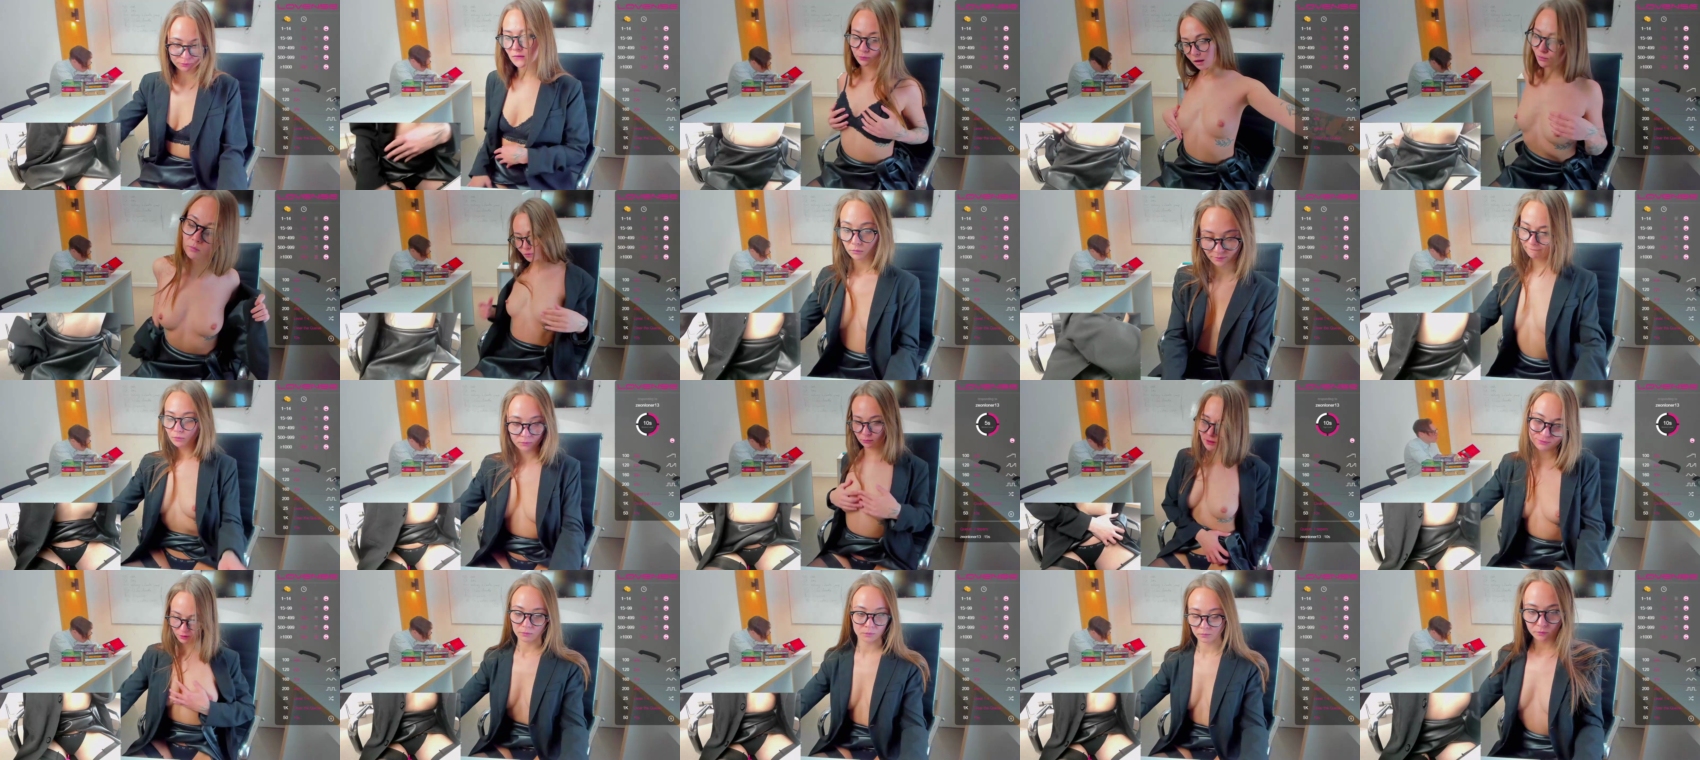 game__of__porn  30-03-2022